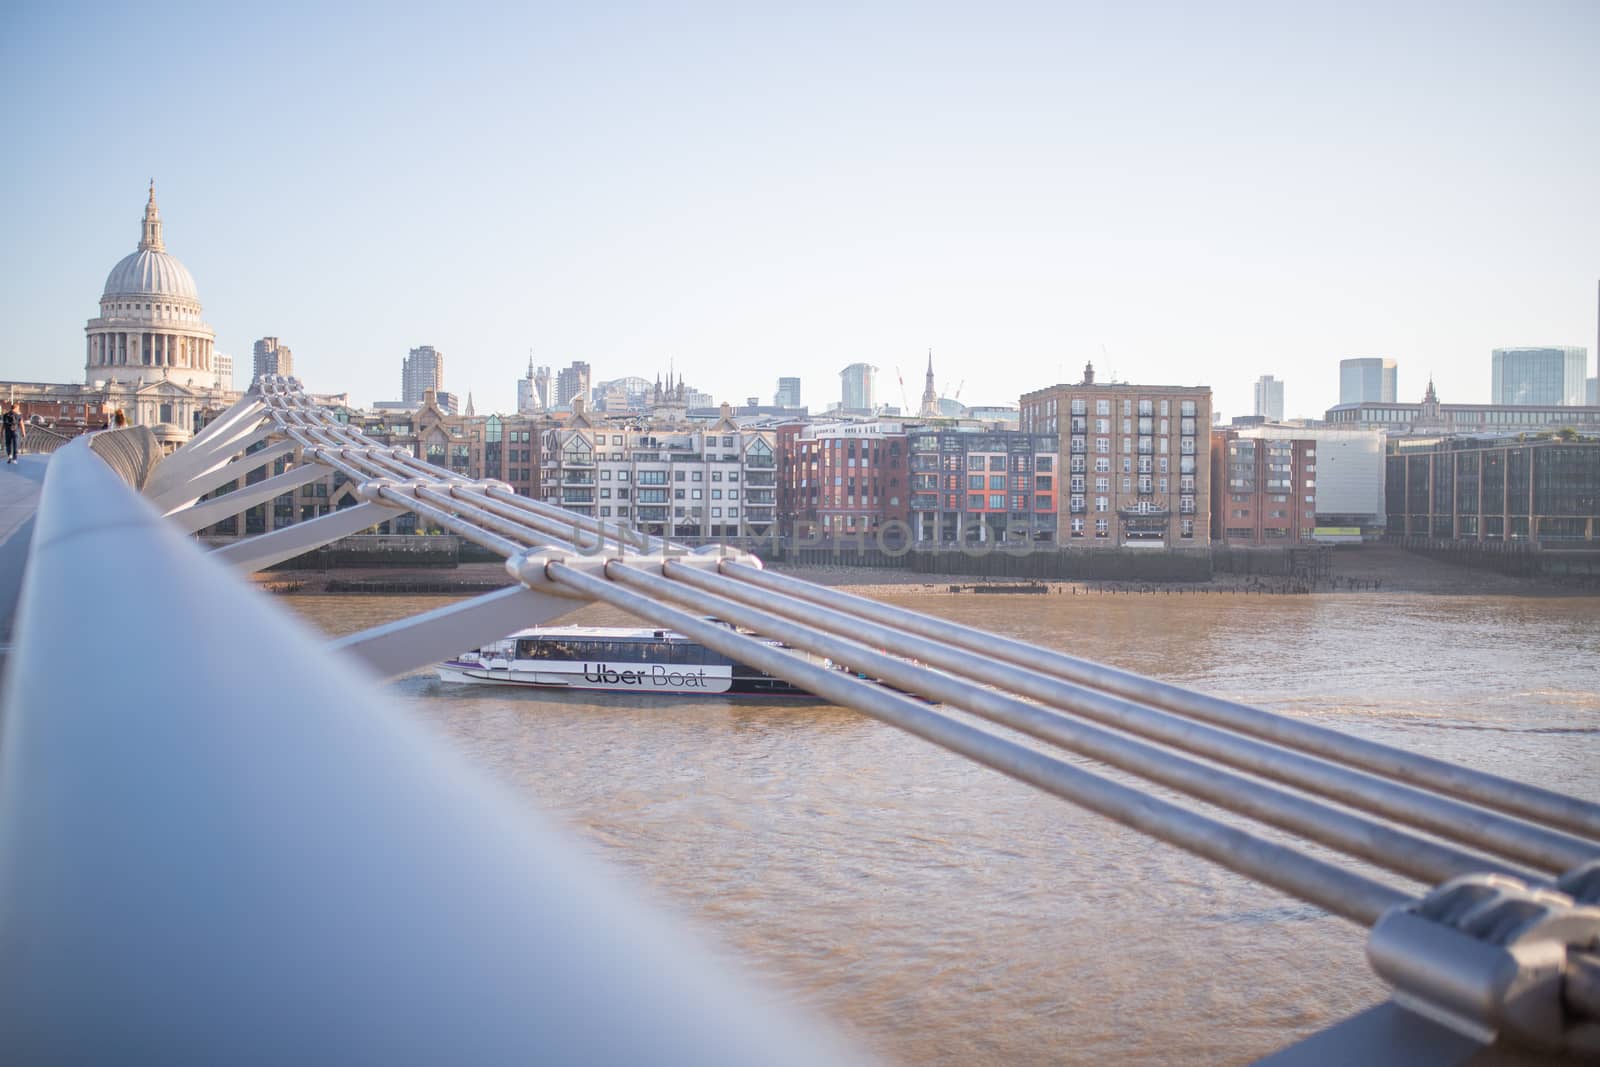 Landscape View of Millenium Bridge Handrail Leading to St Pauls Cathedral in London, UK